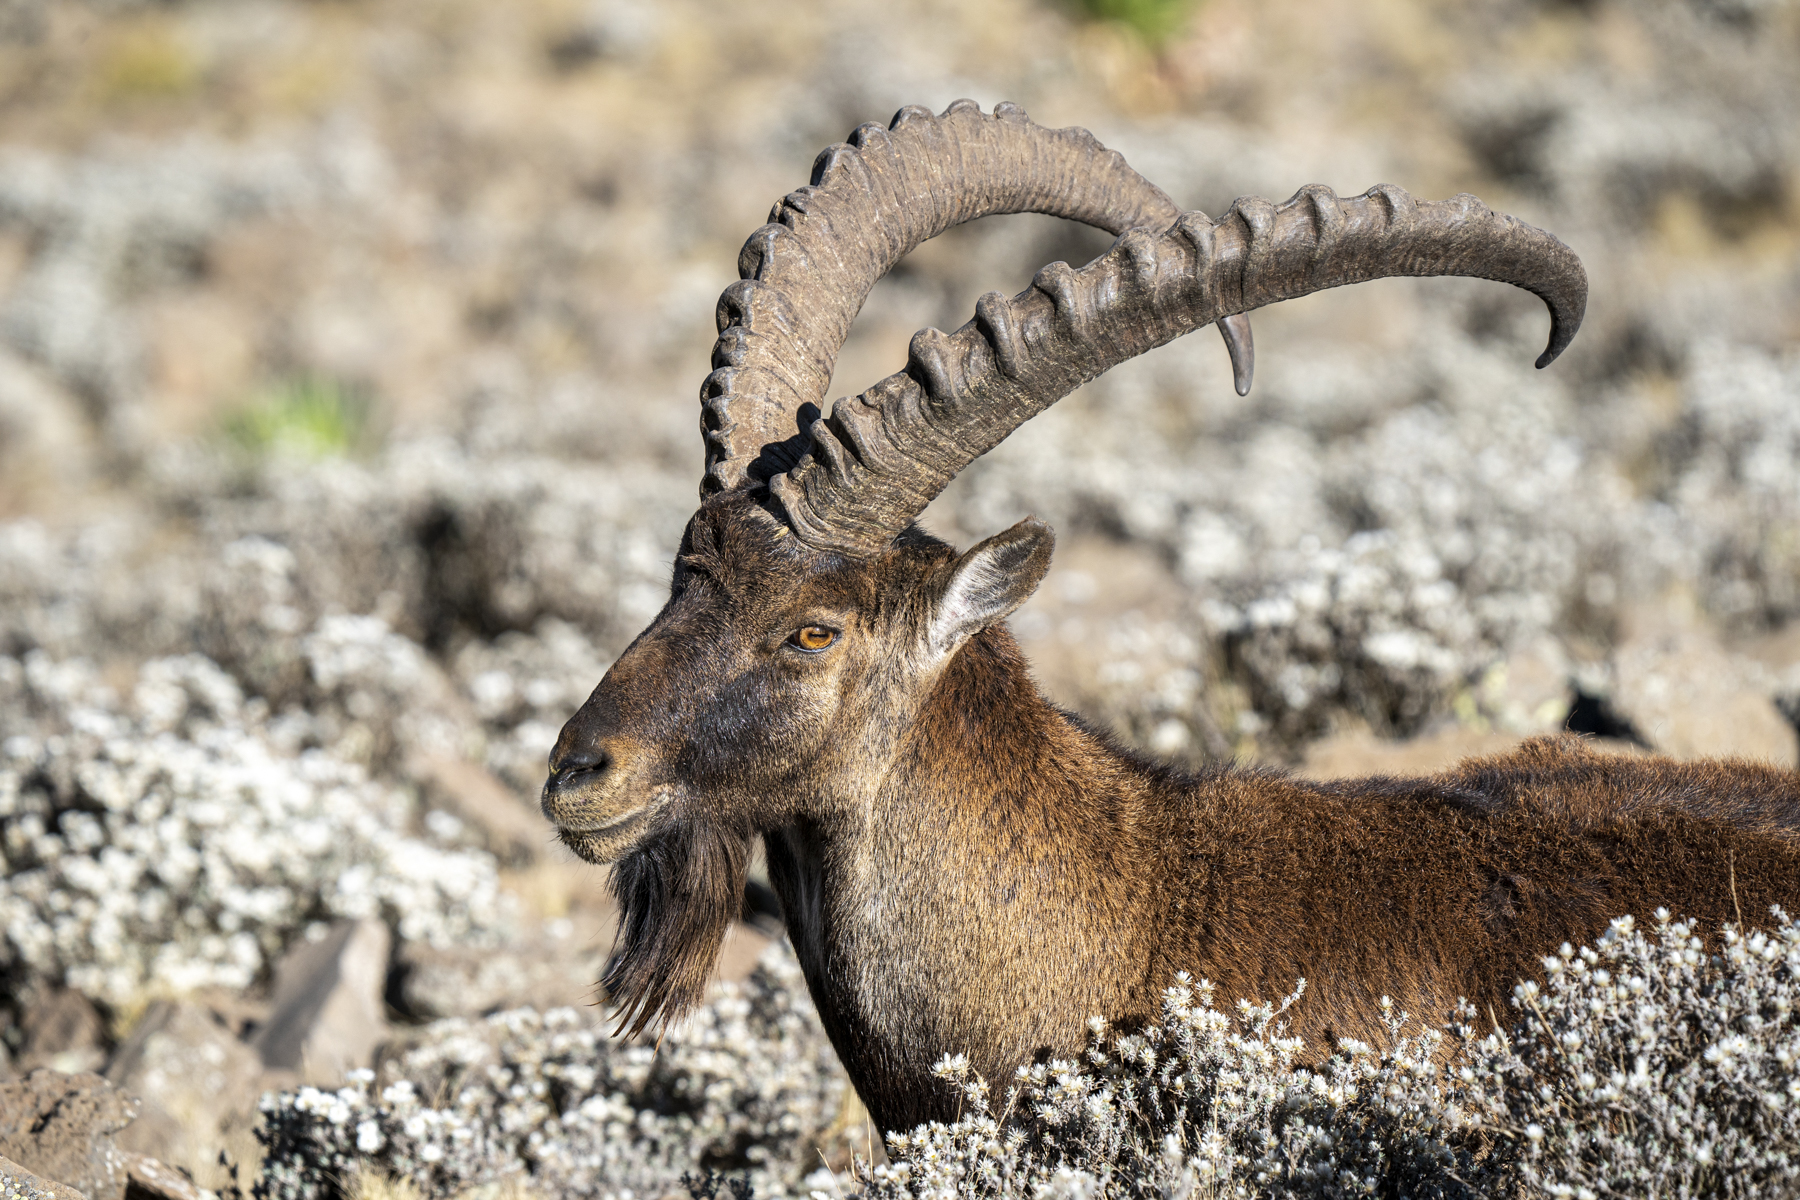 The endangered Wahlia Ibex, endemic to Ethiopia's Simien Mountains (image by Mark Beaman)